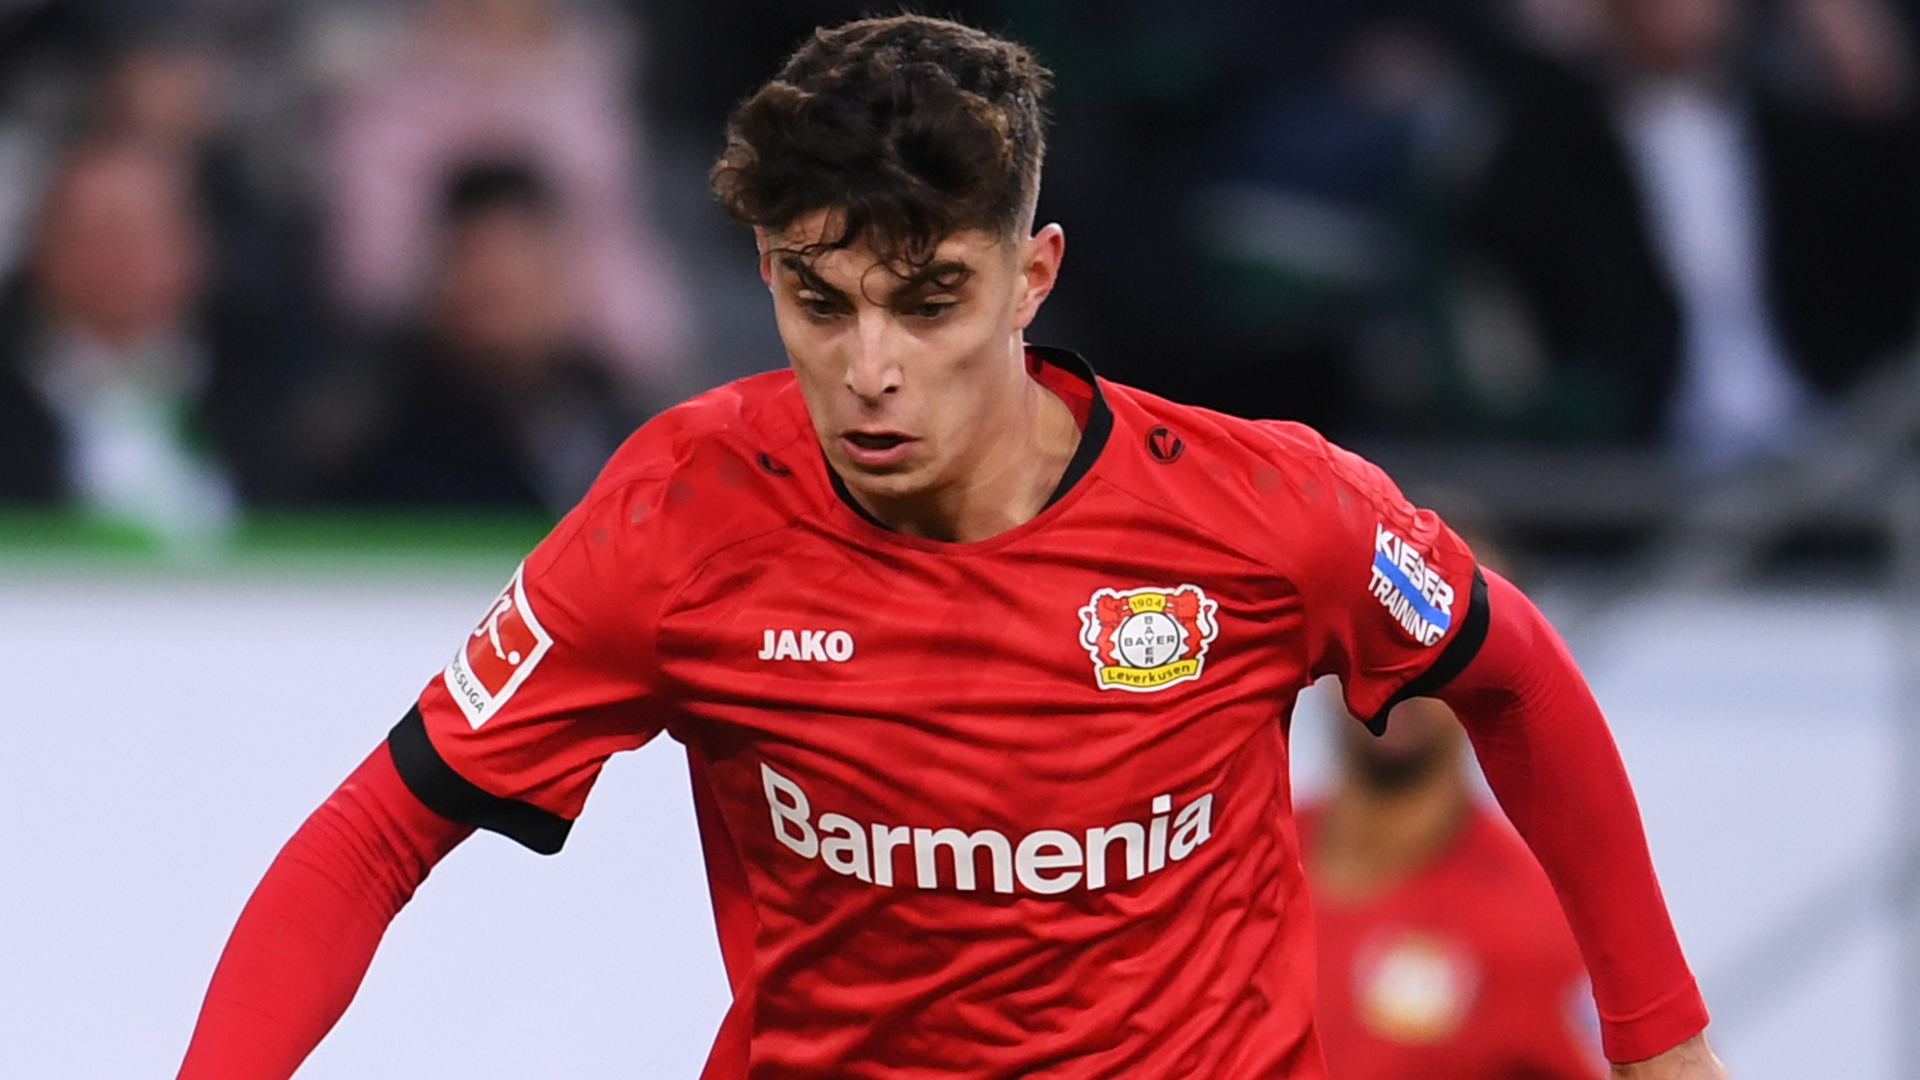 Bayer Leverkusen star Kai Havertz is ready for a move and the attacker could be set for the Premier League.